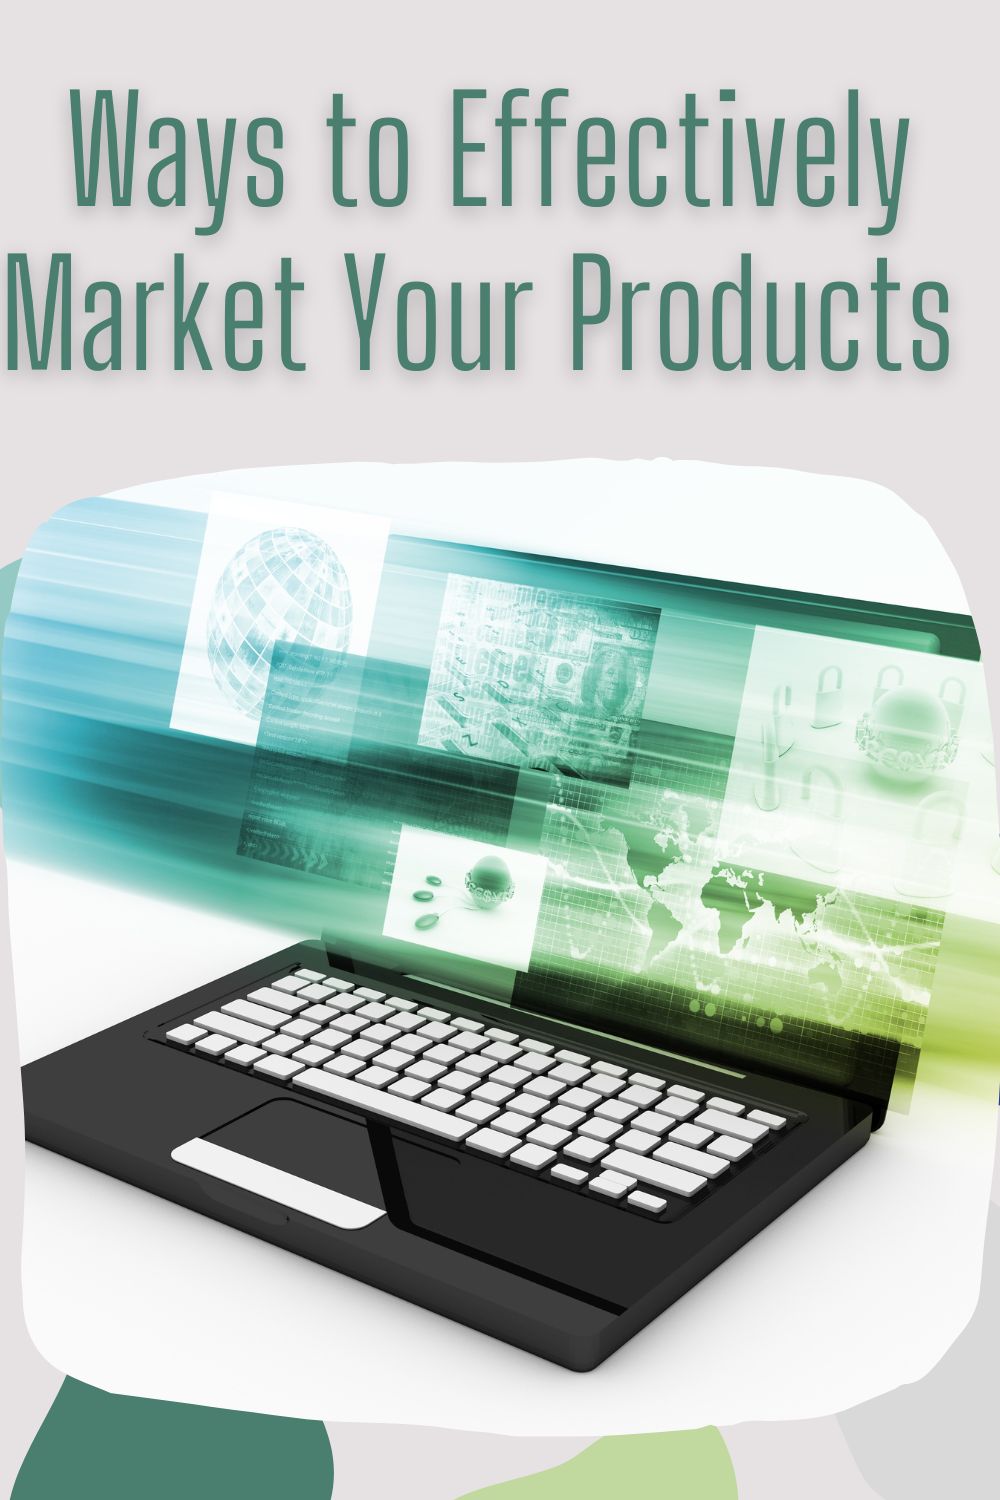 Ways to Effectively Market Your Products: A Business Blog